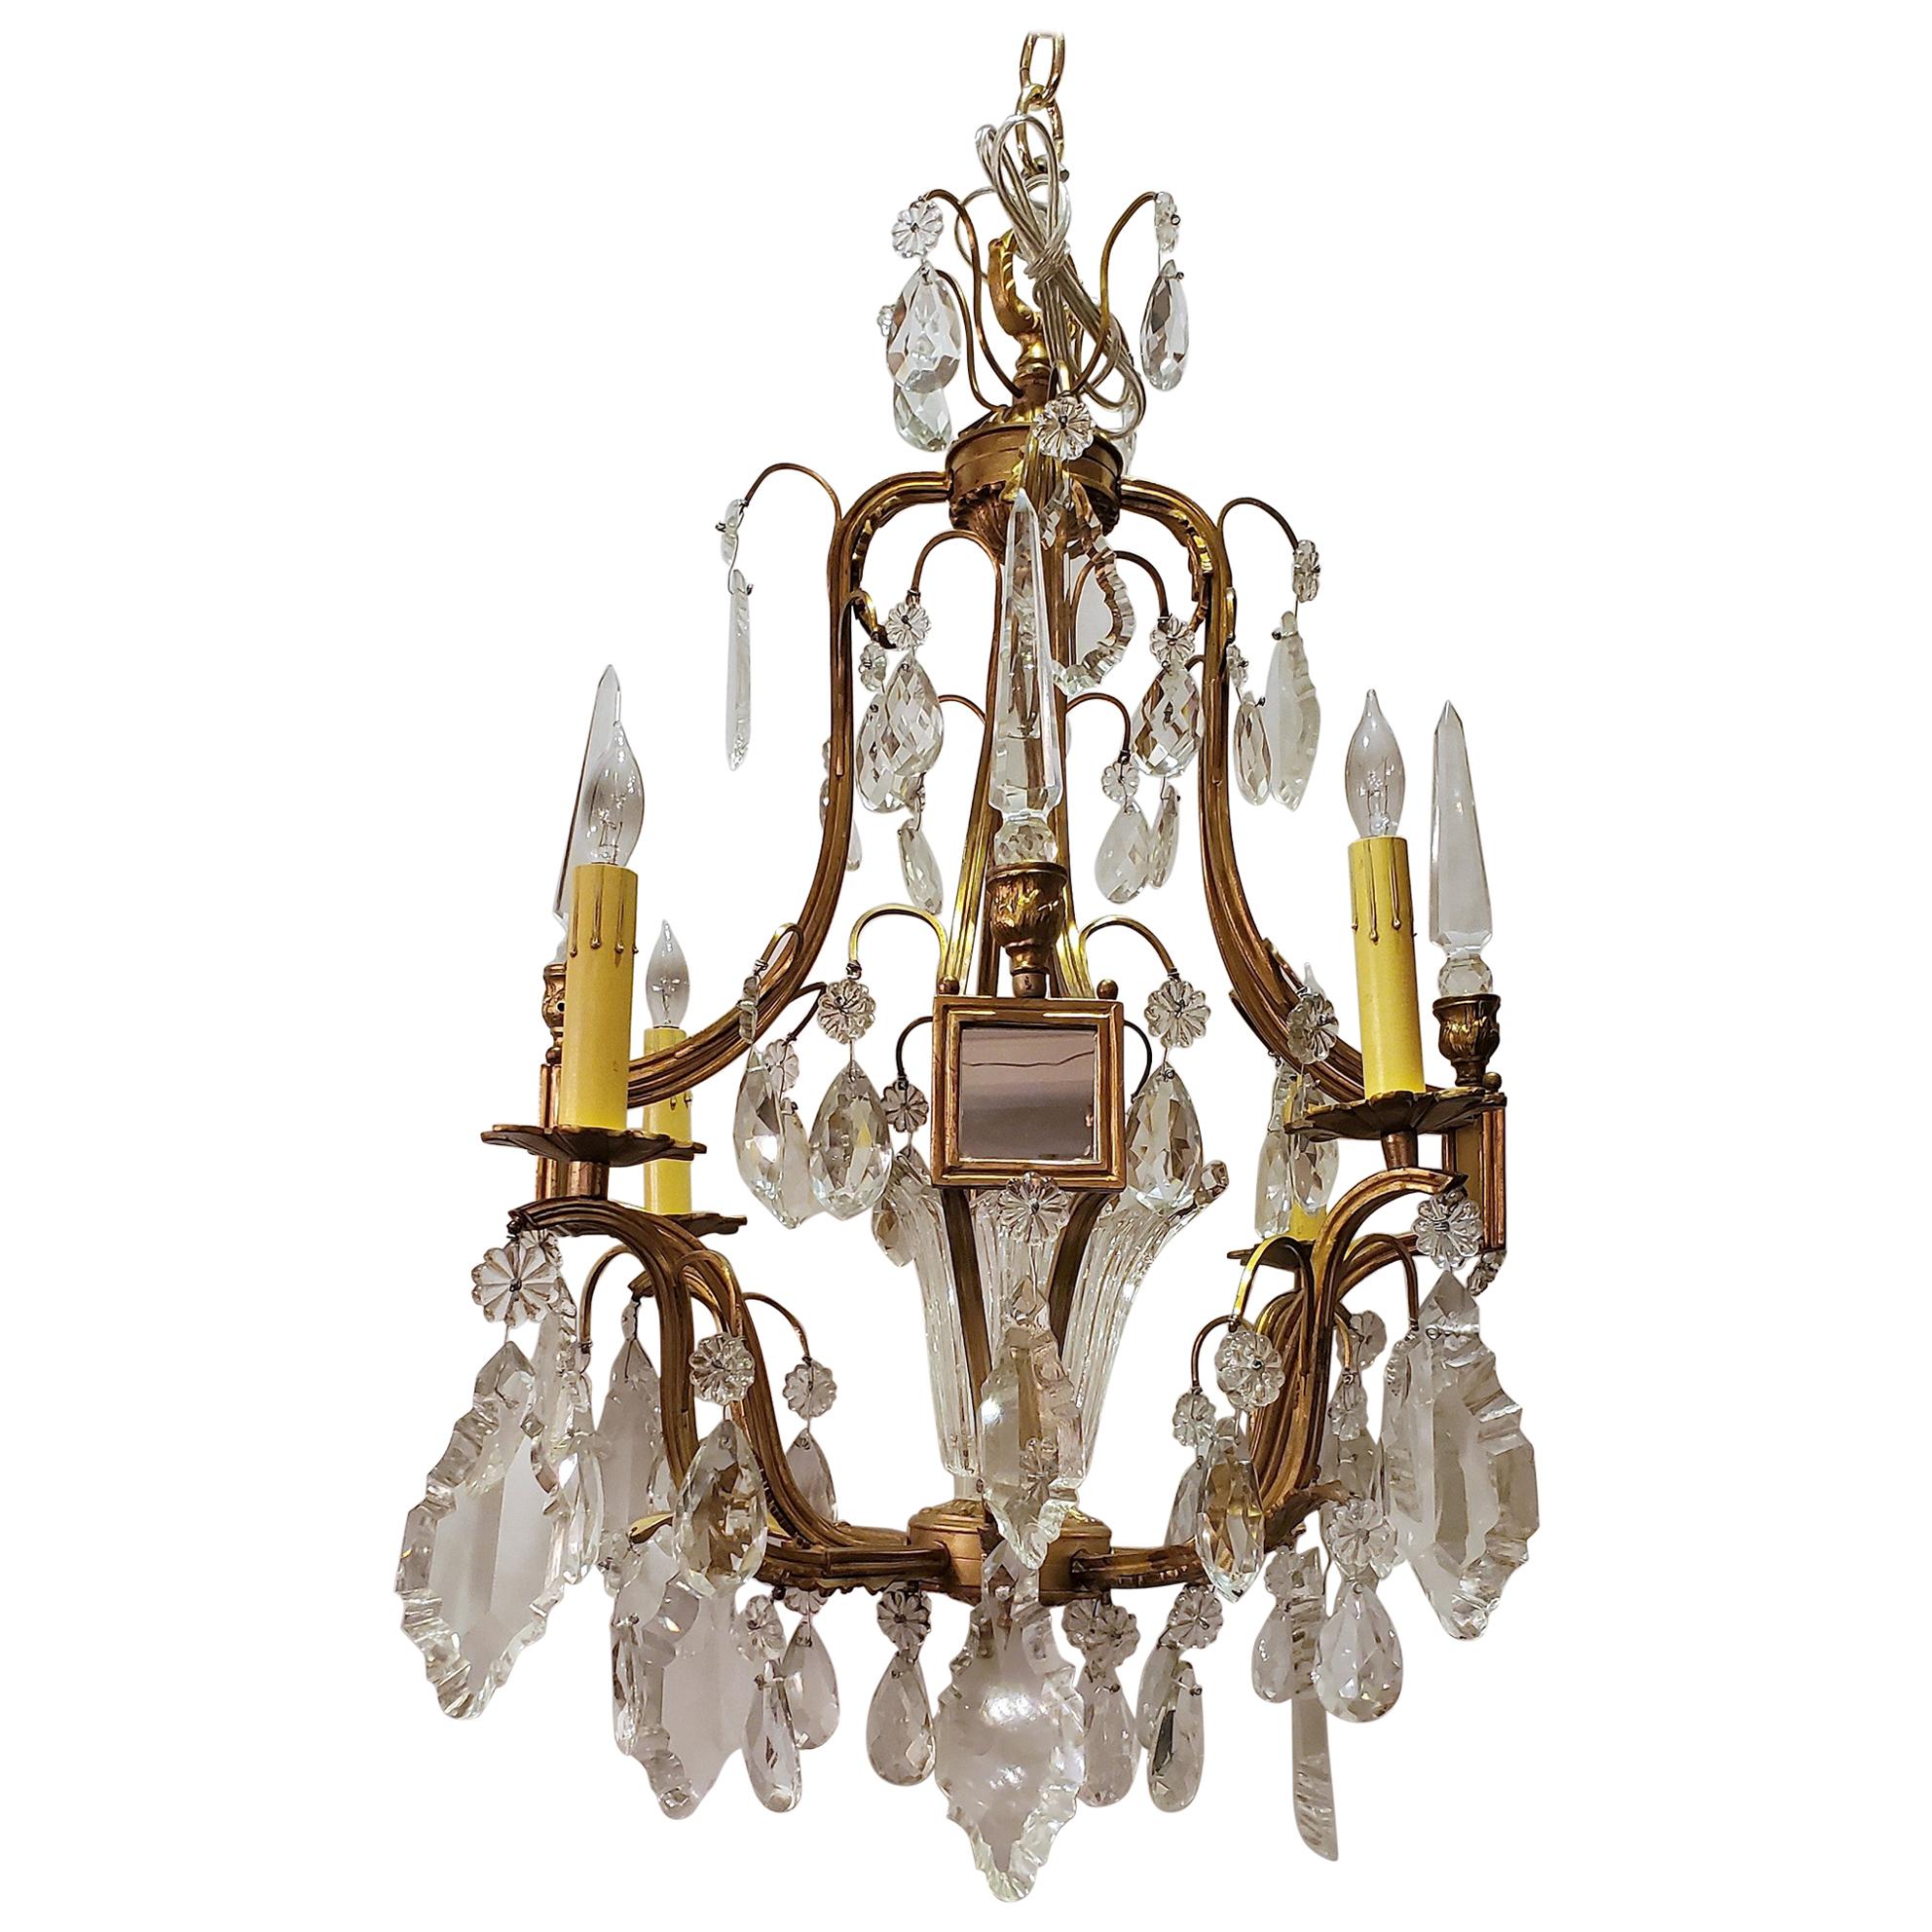 Antique French Ormolu and Baccarat Crystal Chandelier with Mirror Insets For Sale